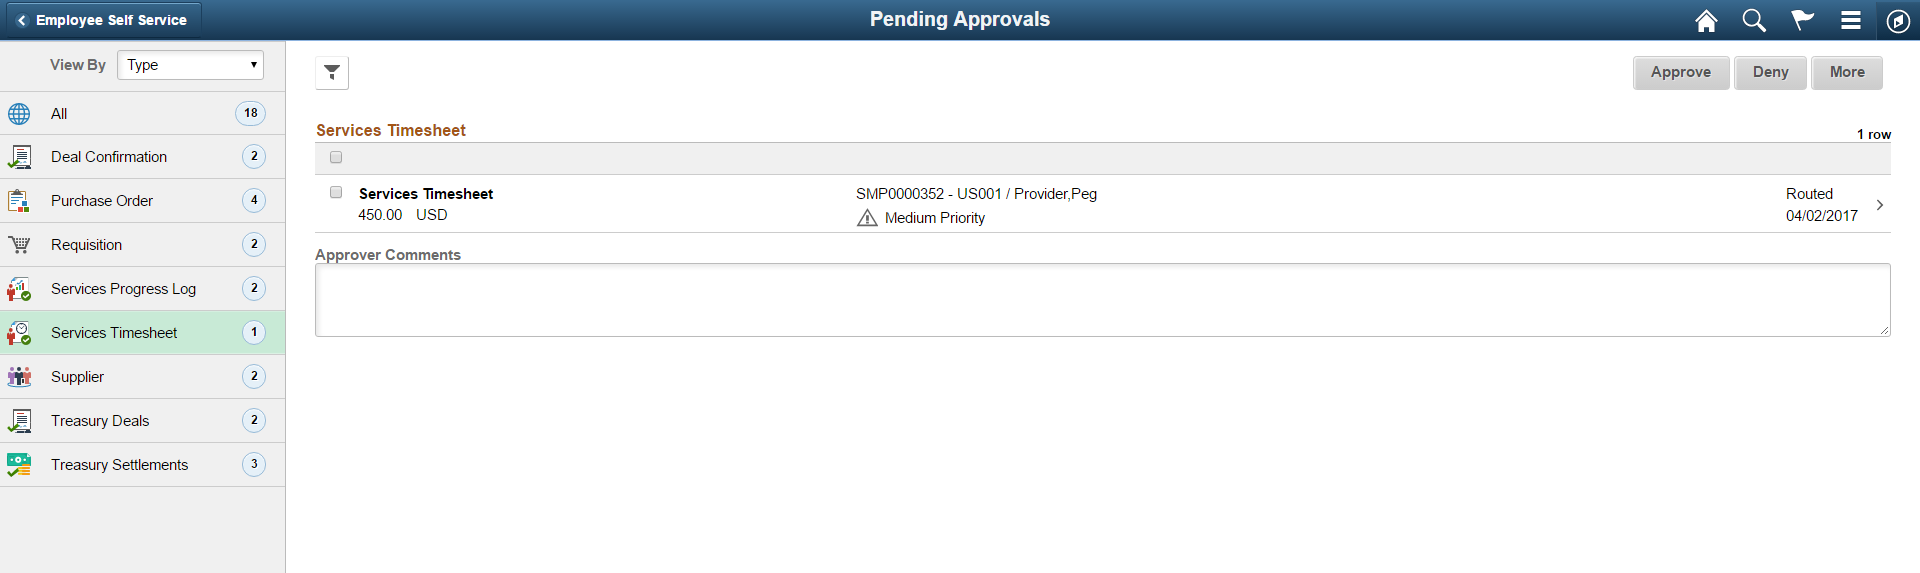 Pending Approvals - Services Timesheet list page